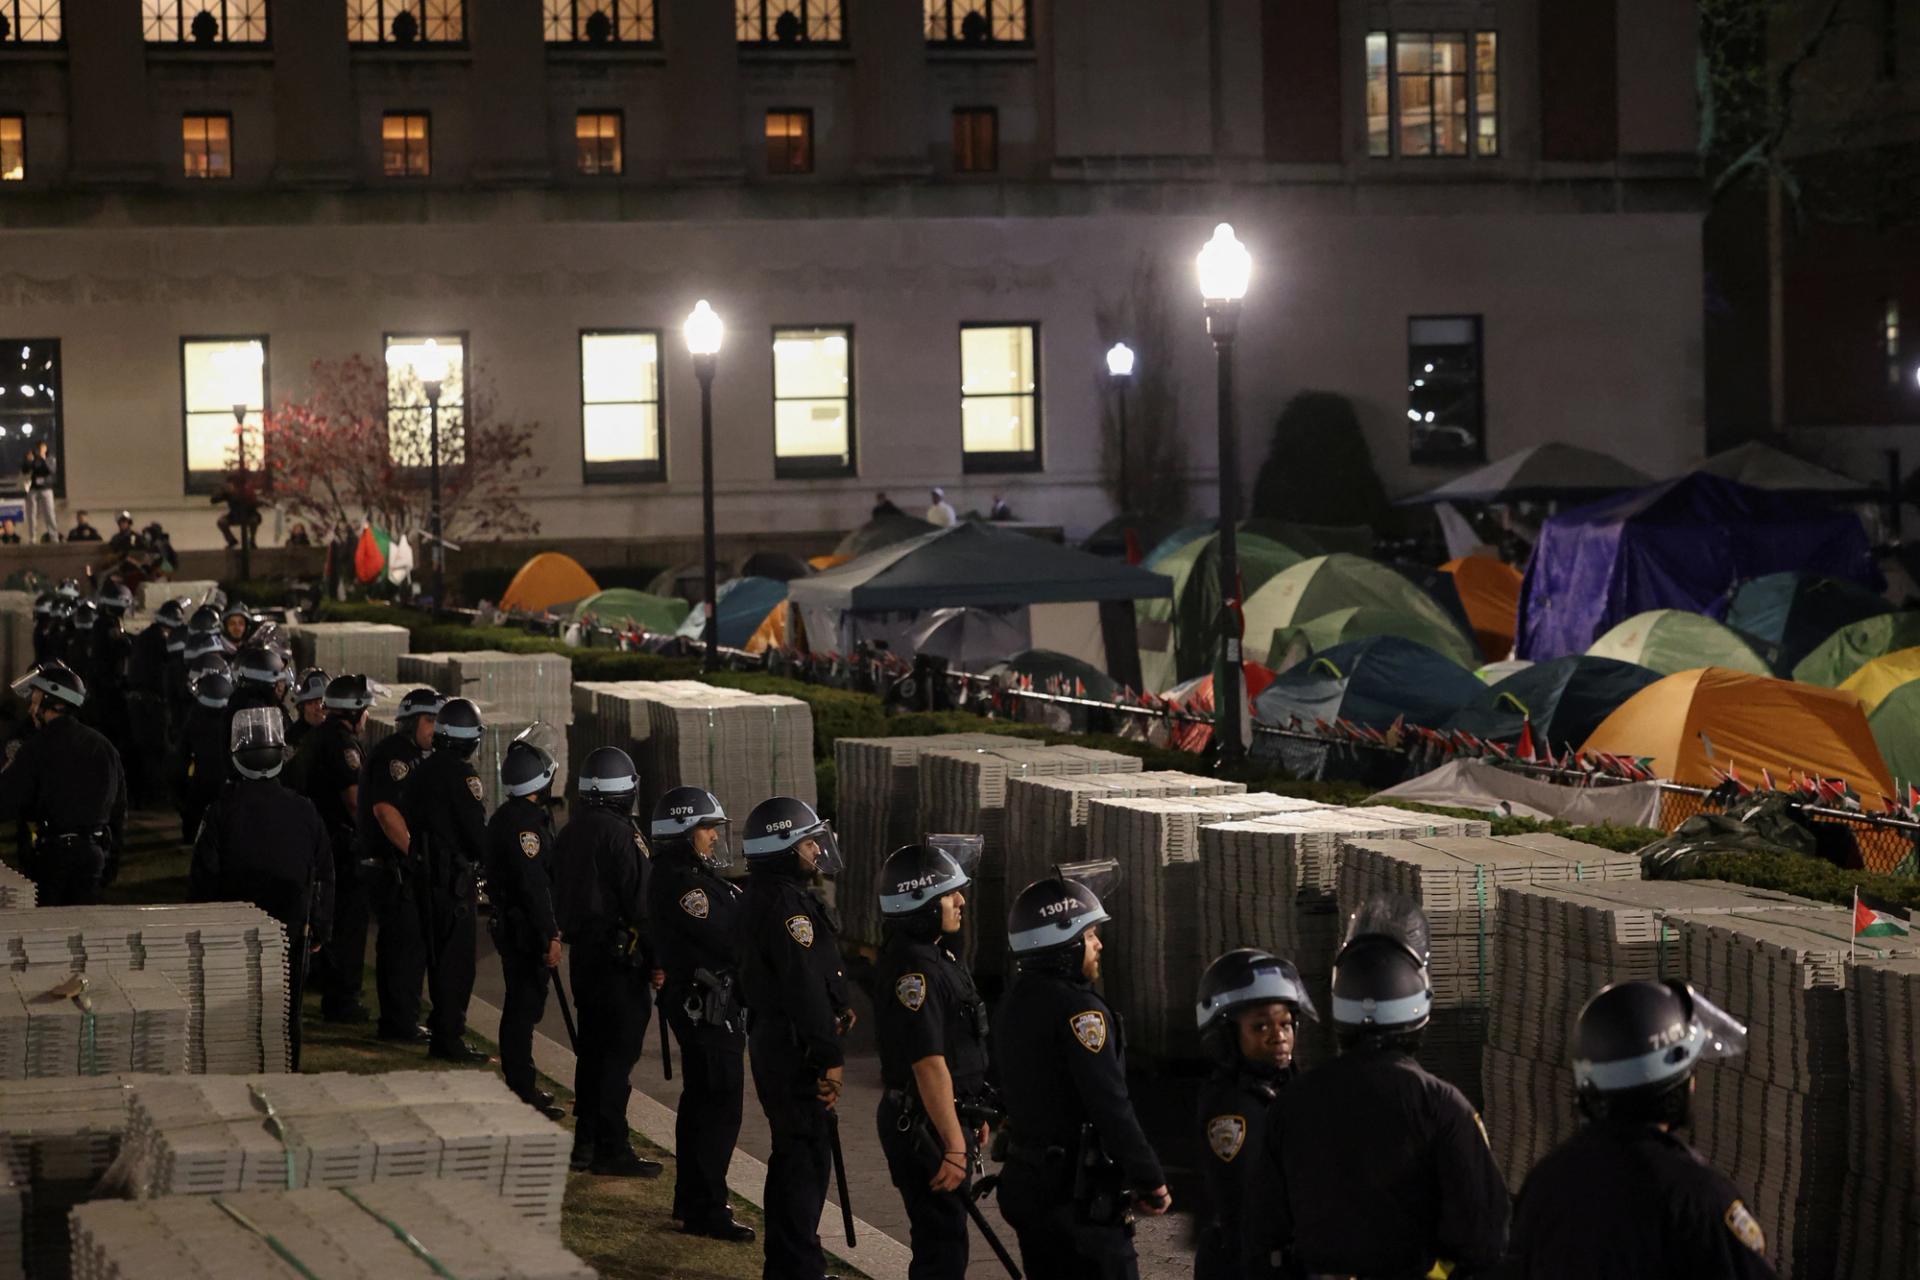 Police stand guard near an encampment of protesters supporting Palestinians on the grounds of Columbia University.